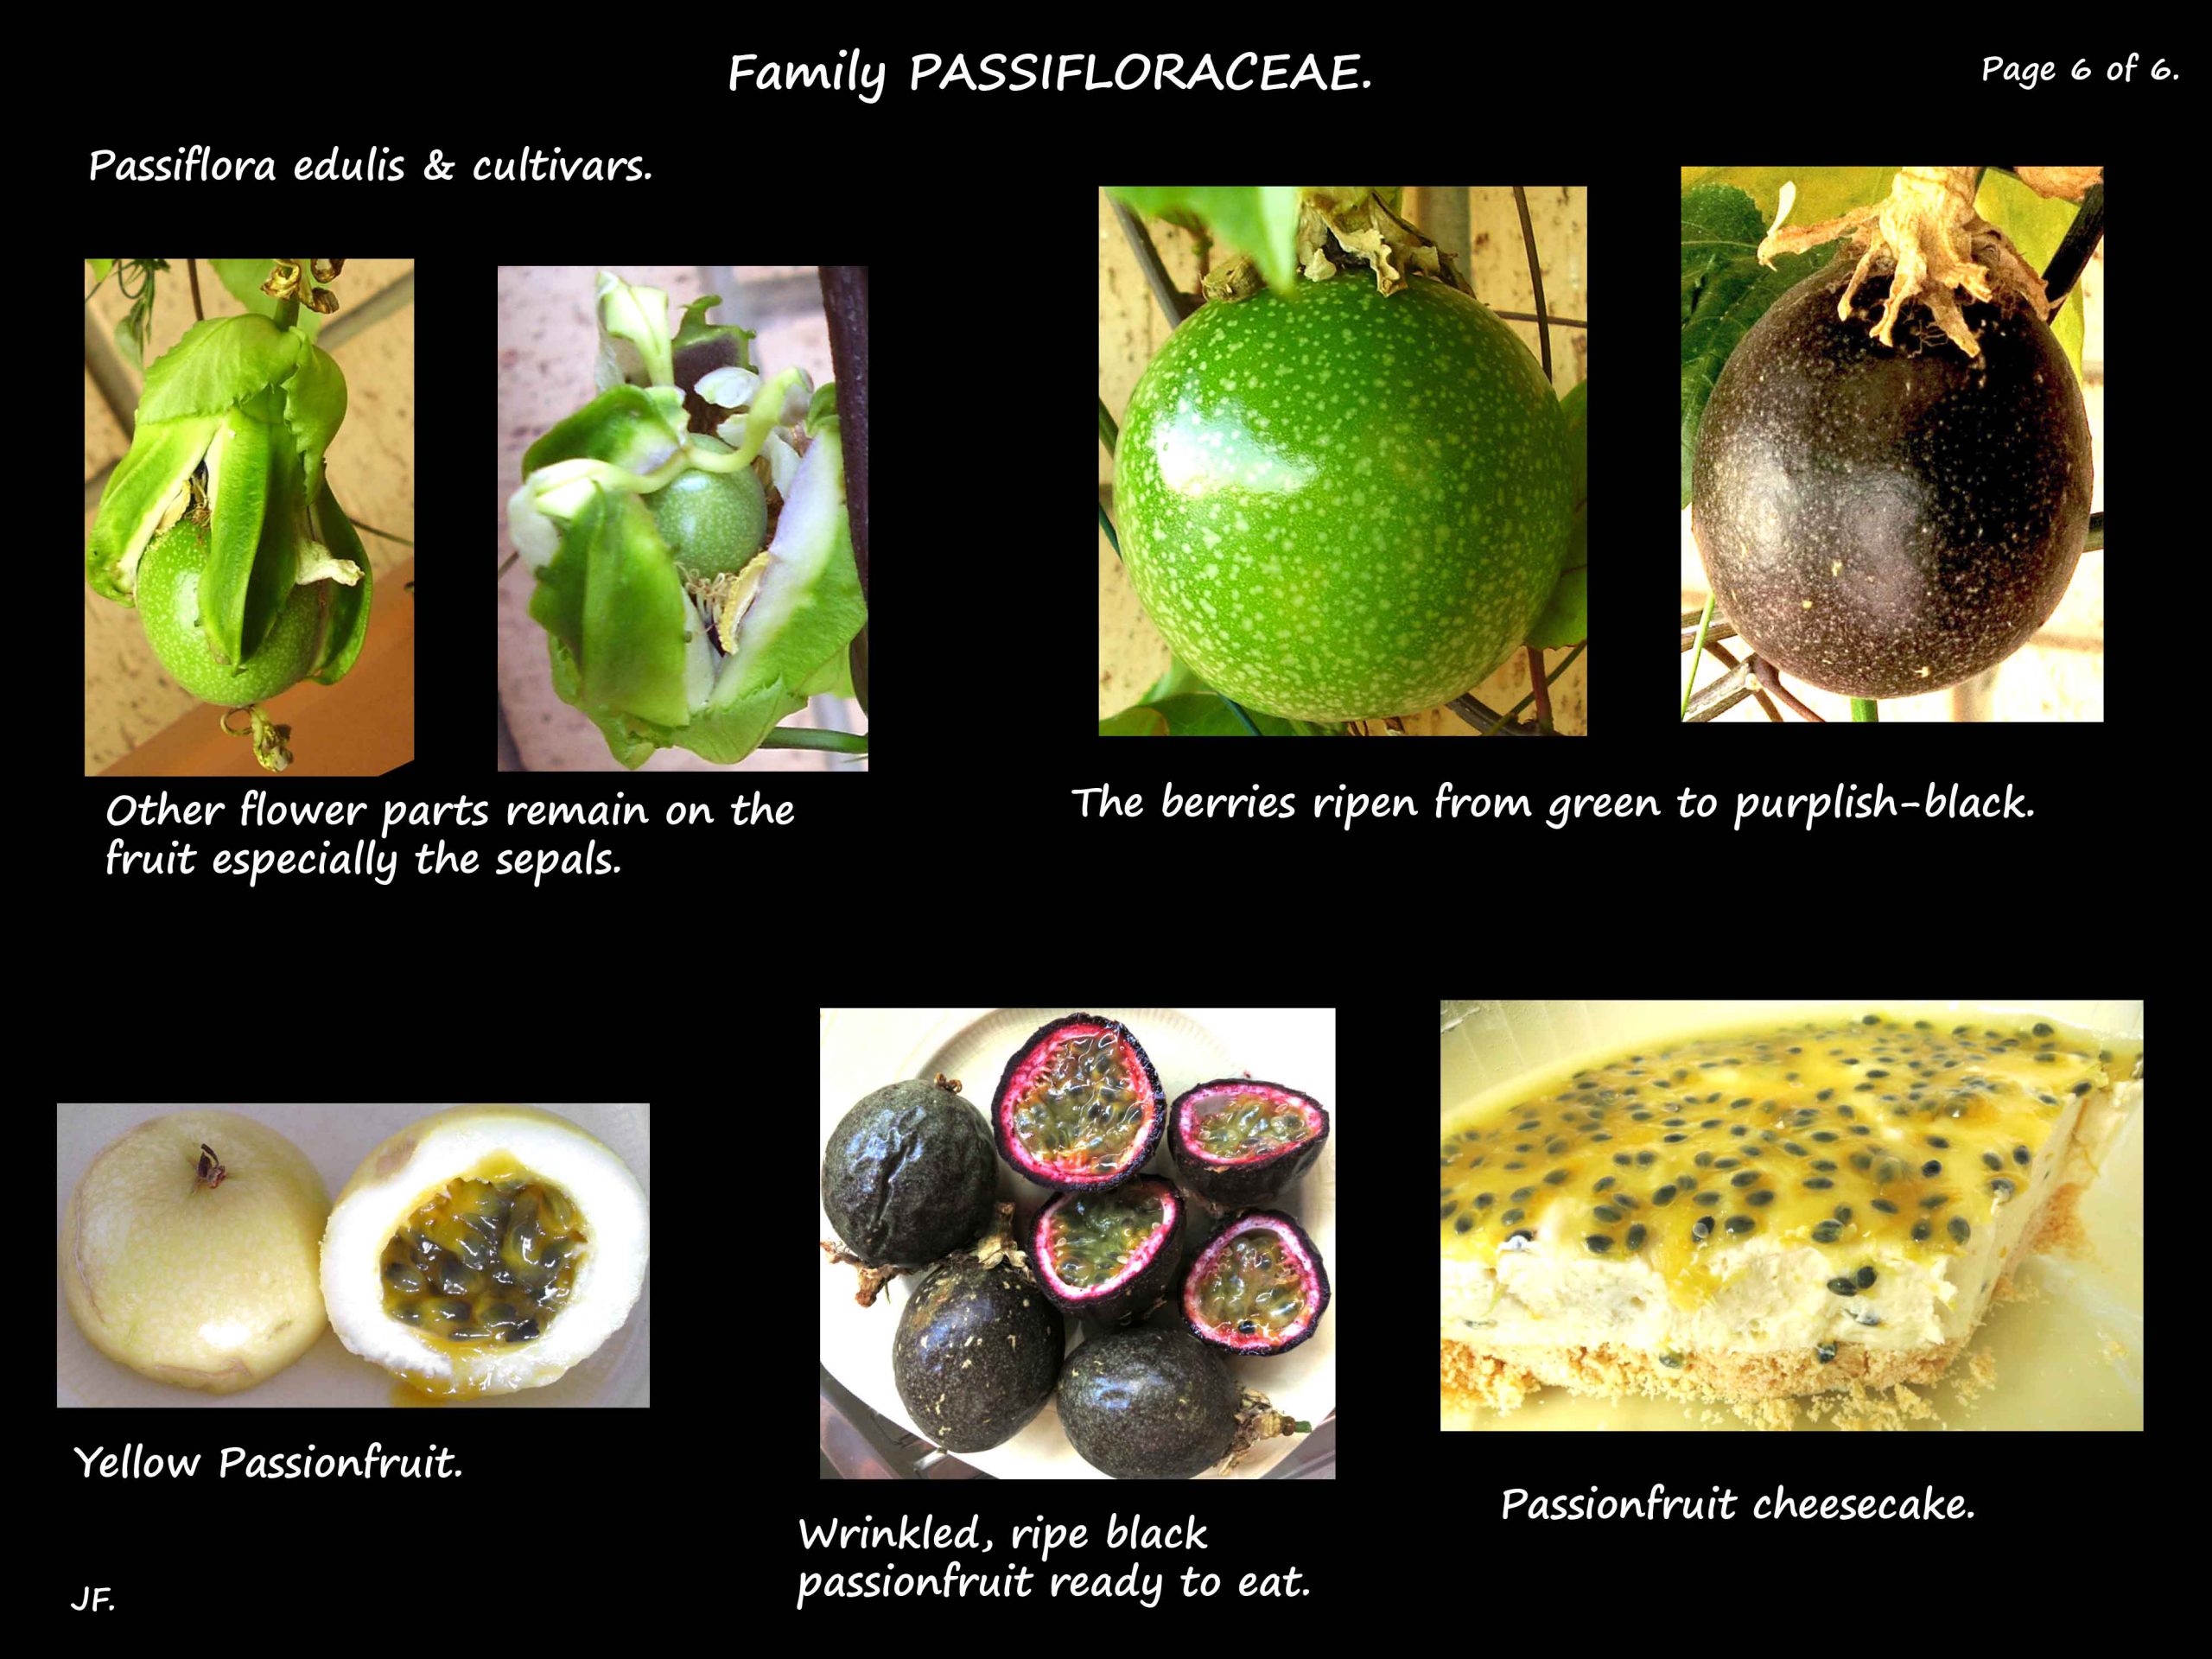 6 The common passionfruit